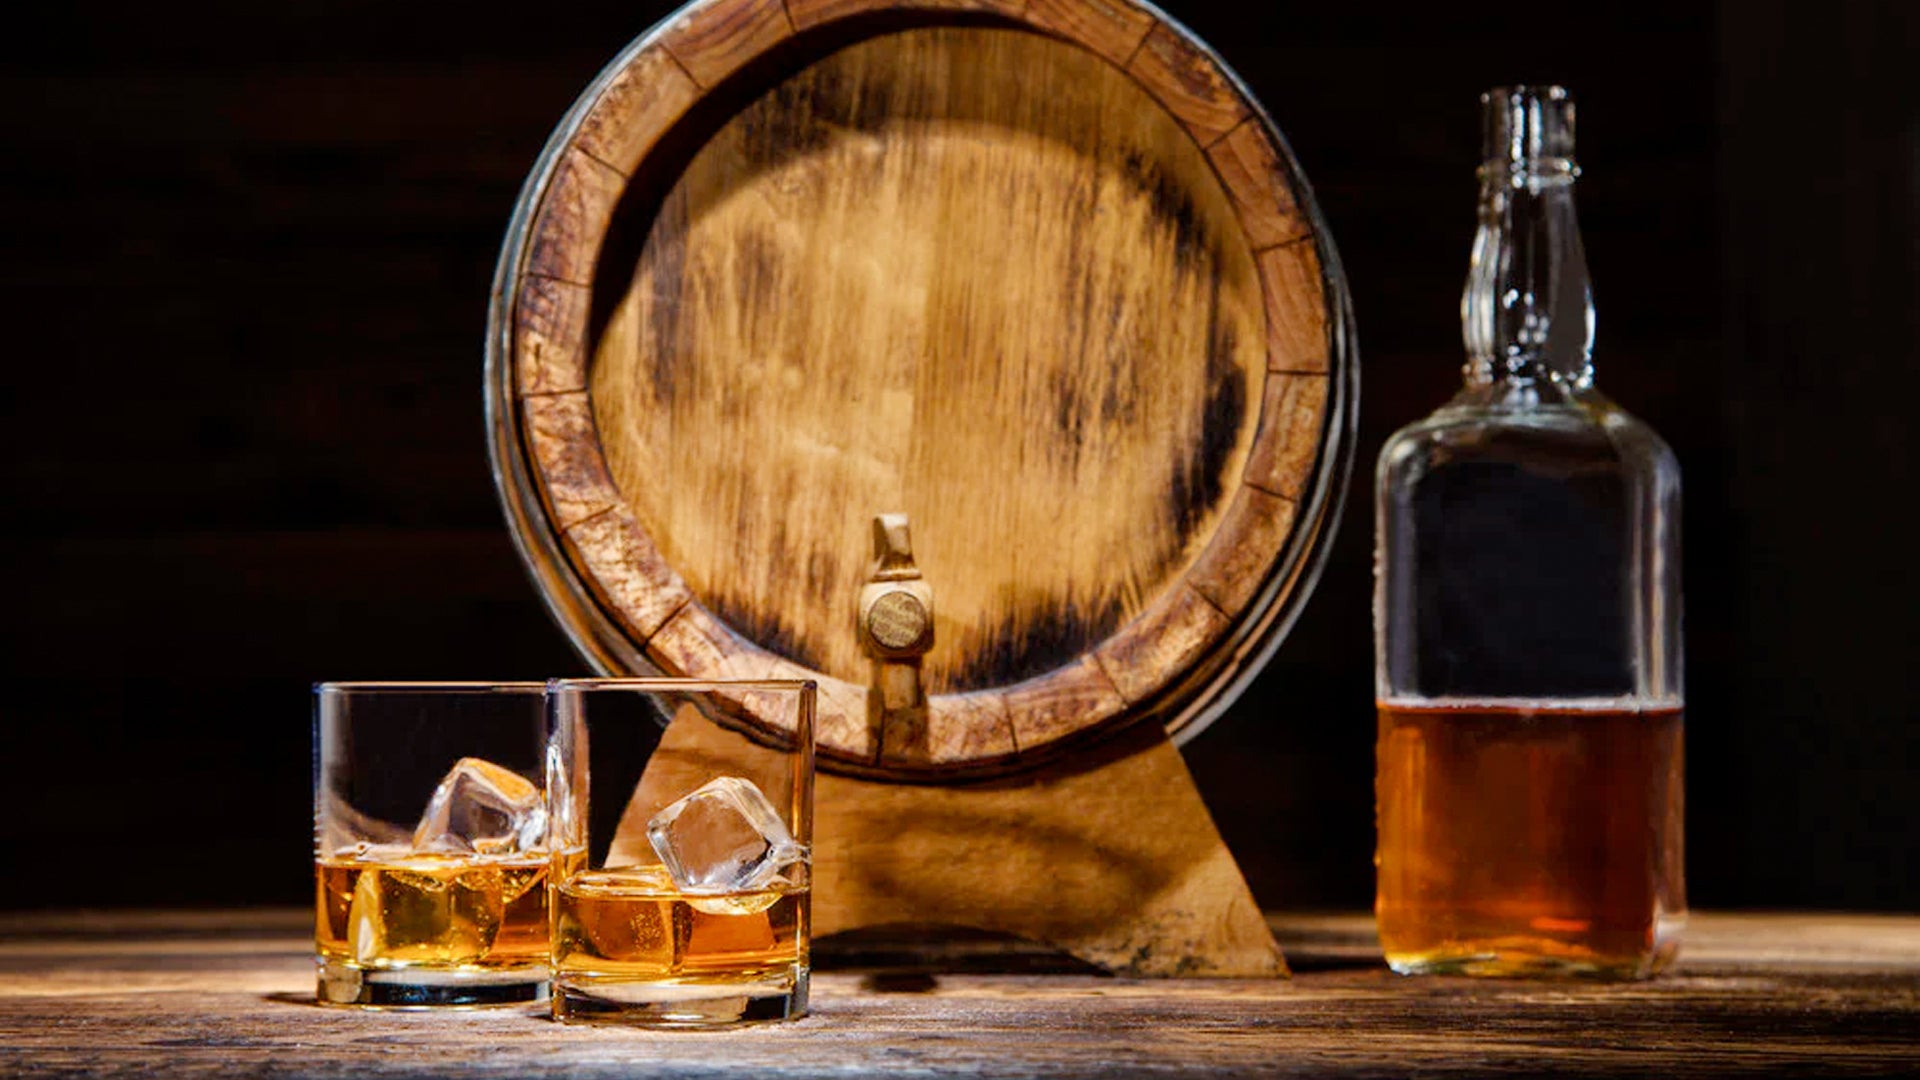 Does Whisky Get Better & Stronger With Age?